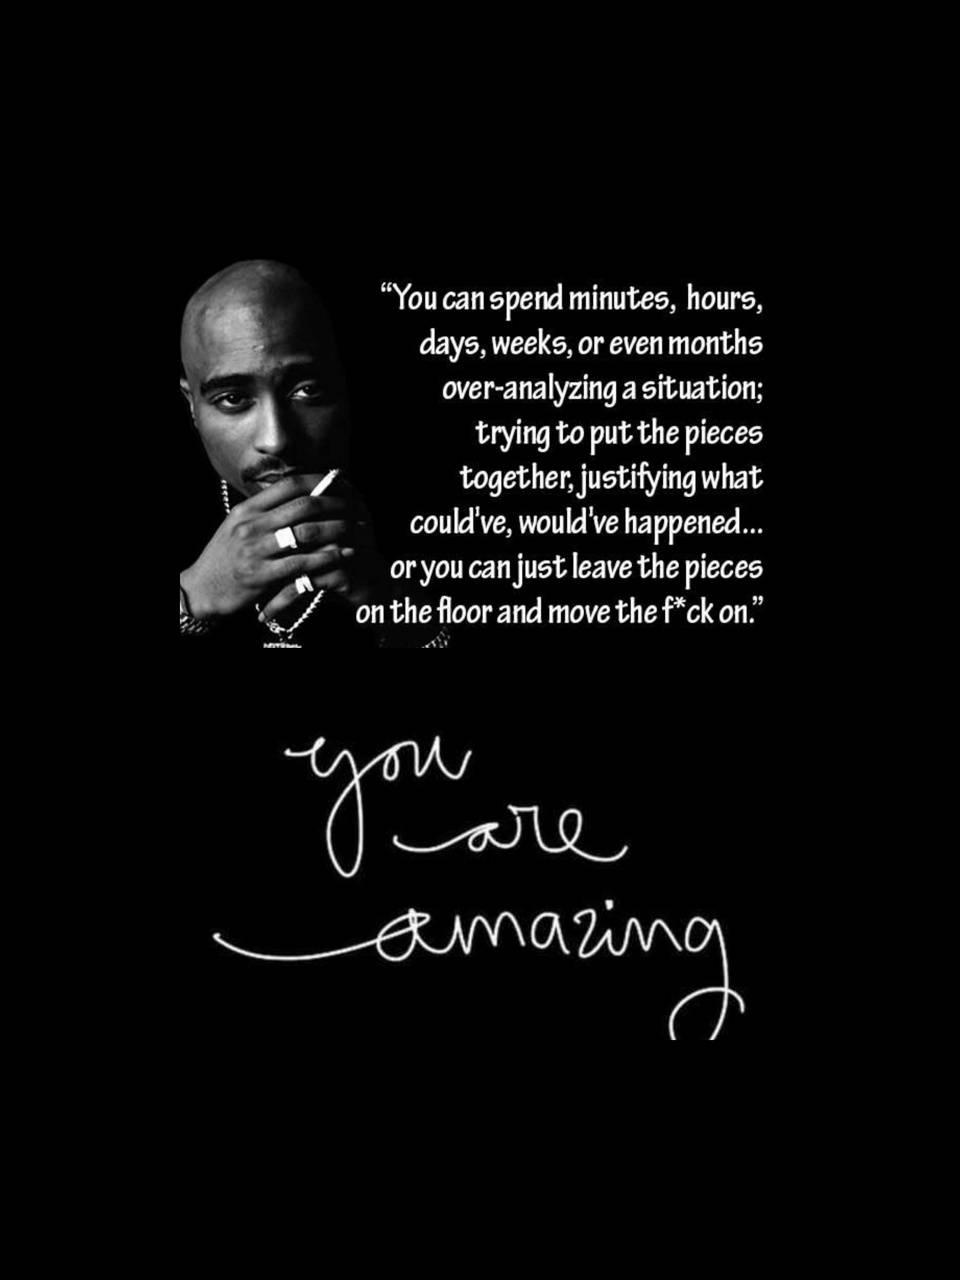 Tupac quote Wallpaper